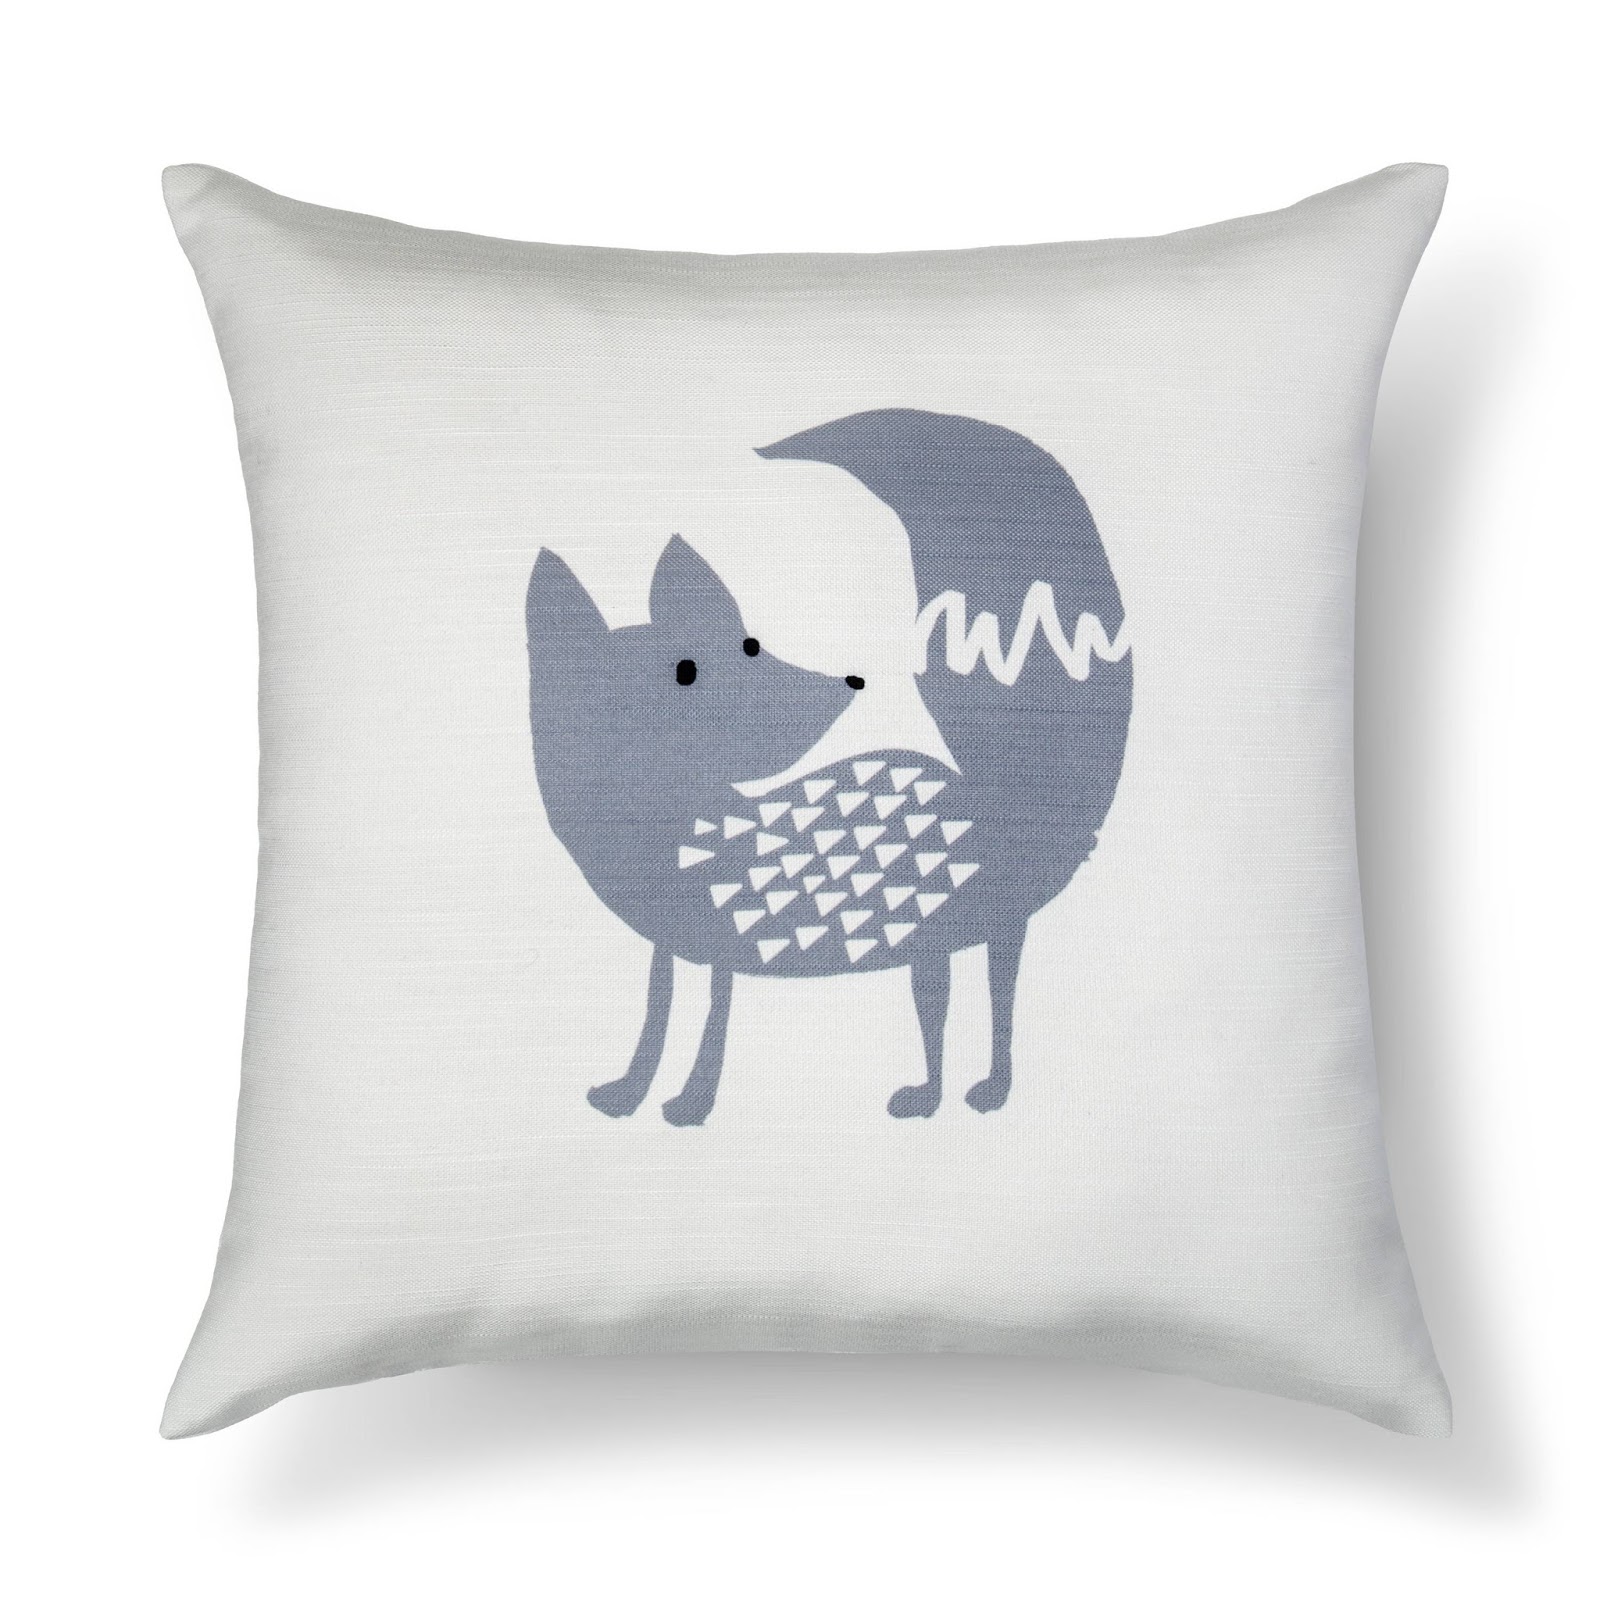 Can you help me find this adorable pillow for my new apartment? | Effortlessly With Roxy